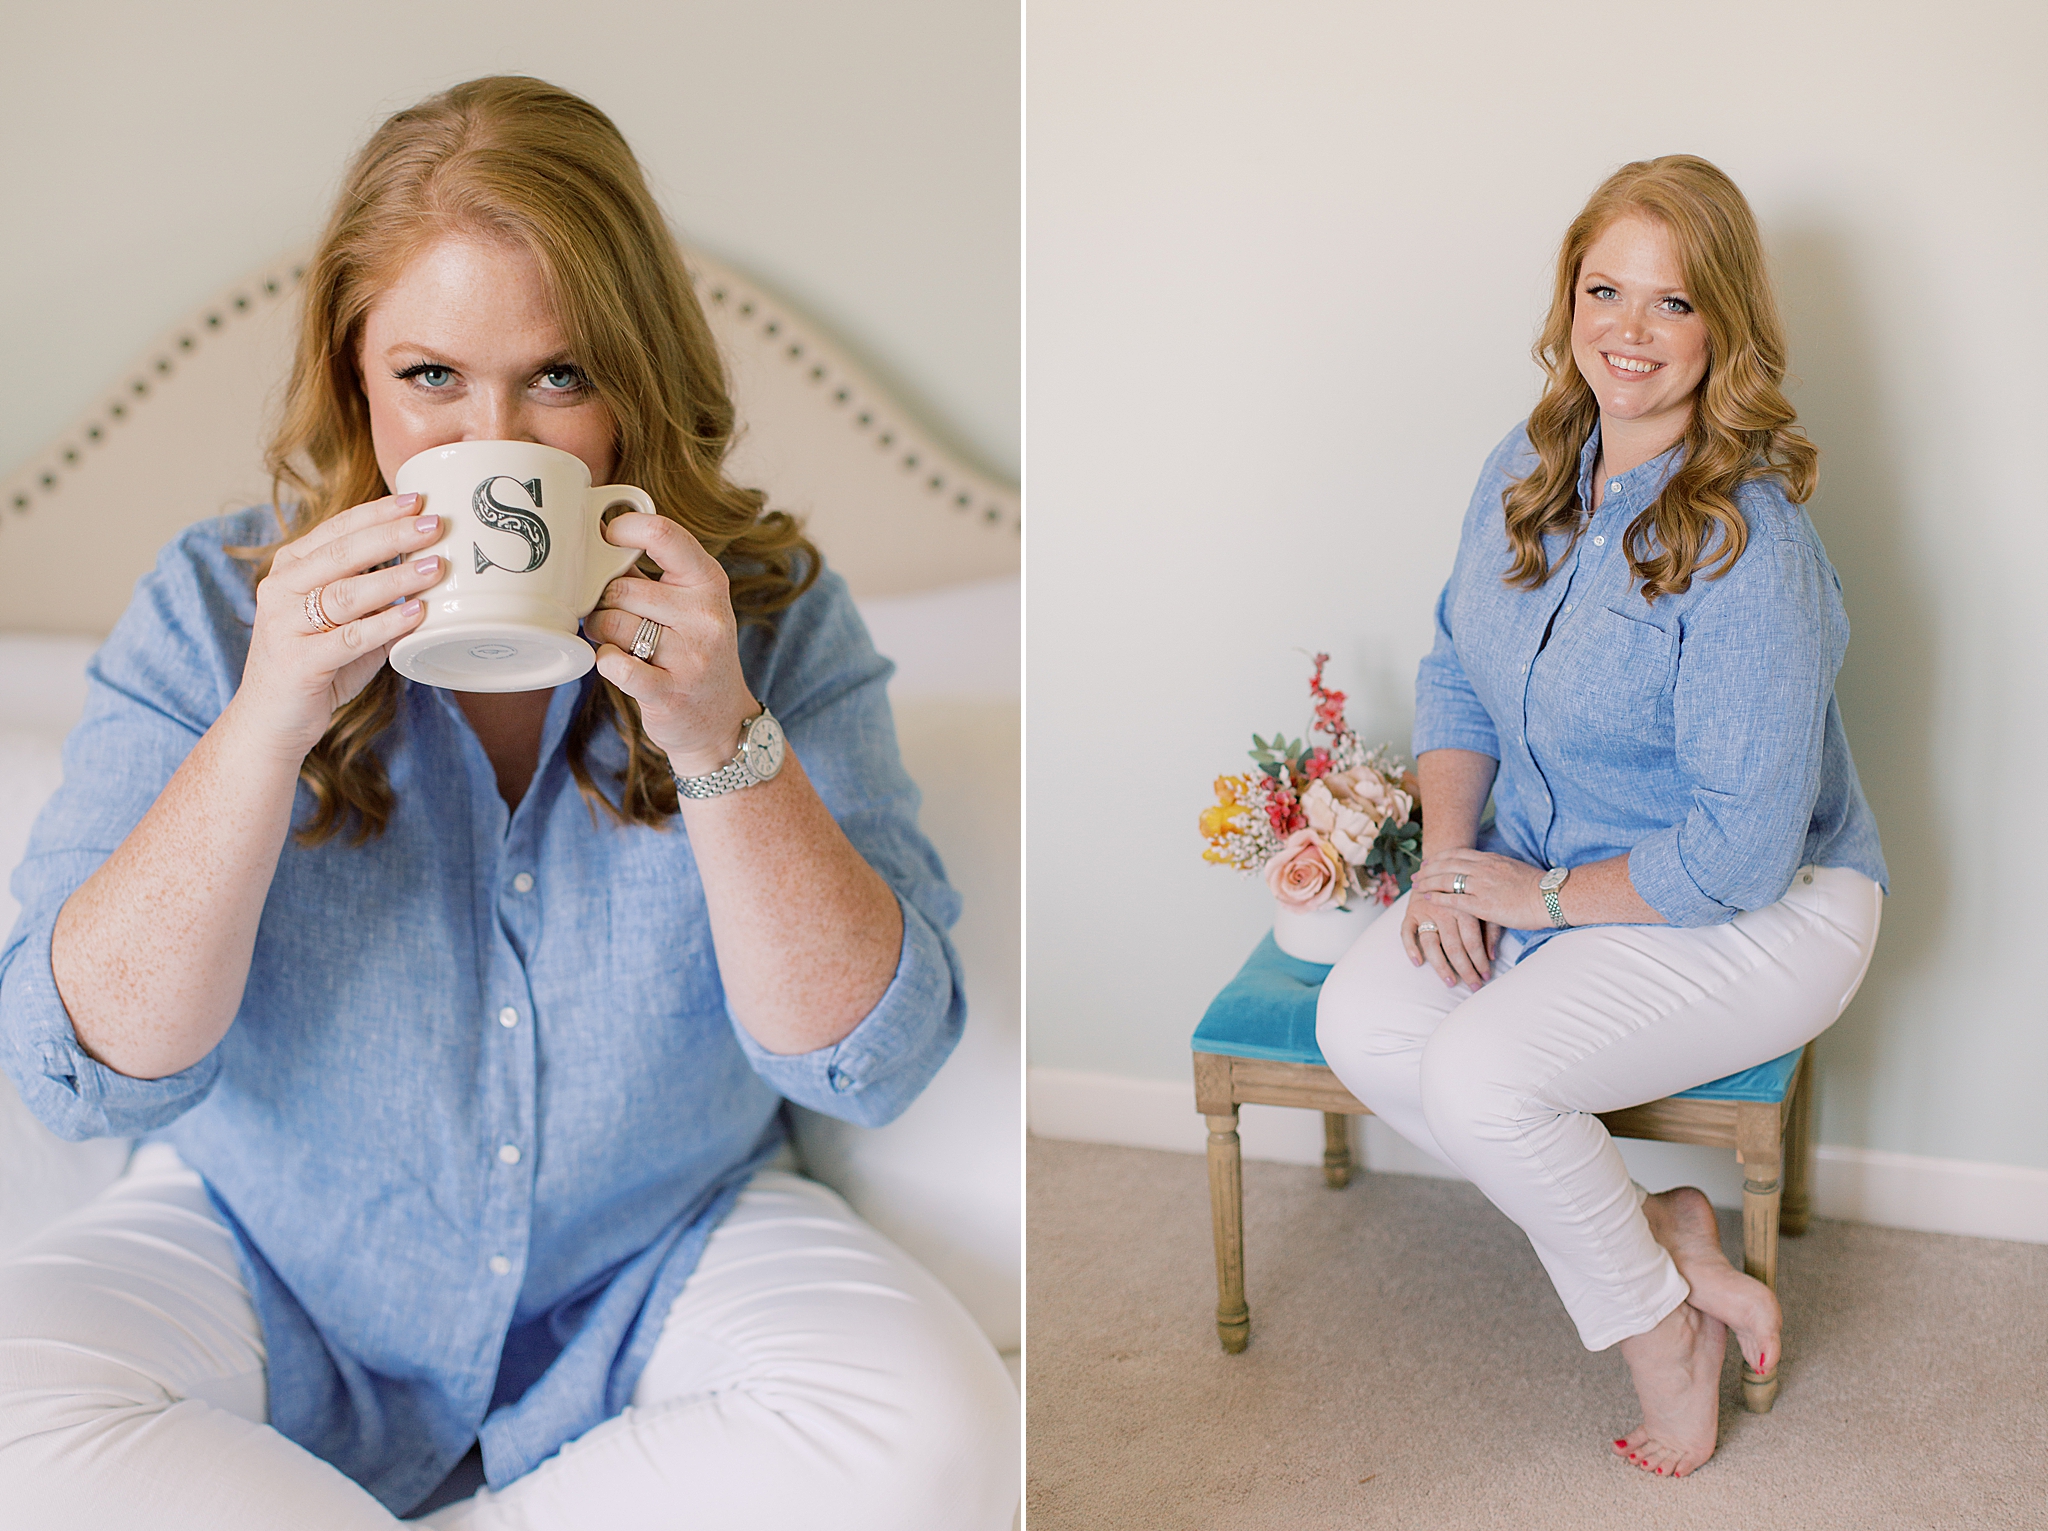 woman drinks from coffee mug on bed during branding photos with Charlotte branding photographer